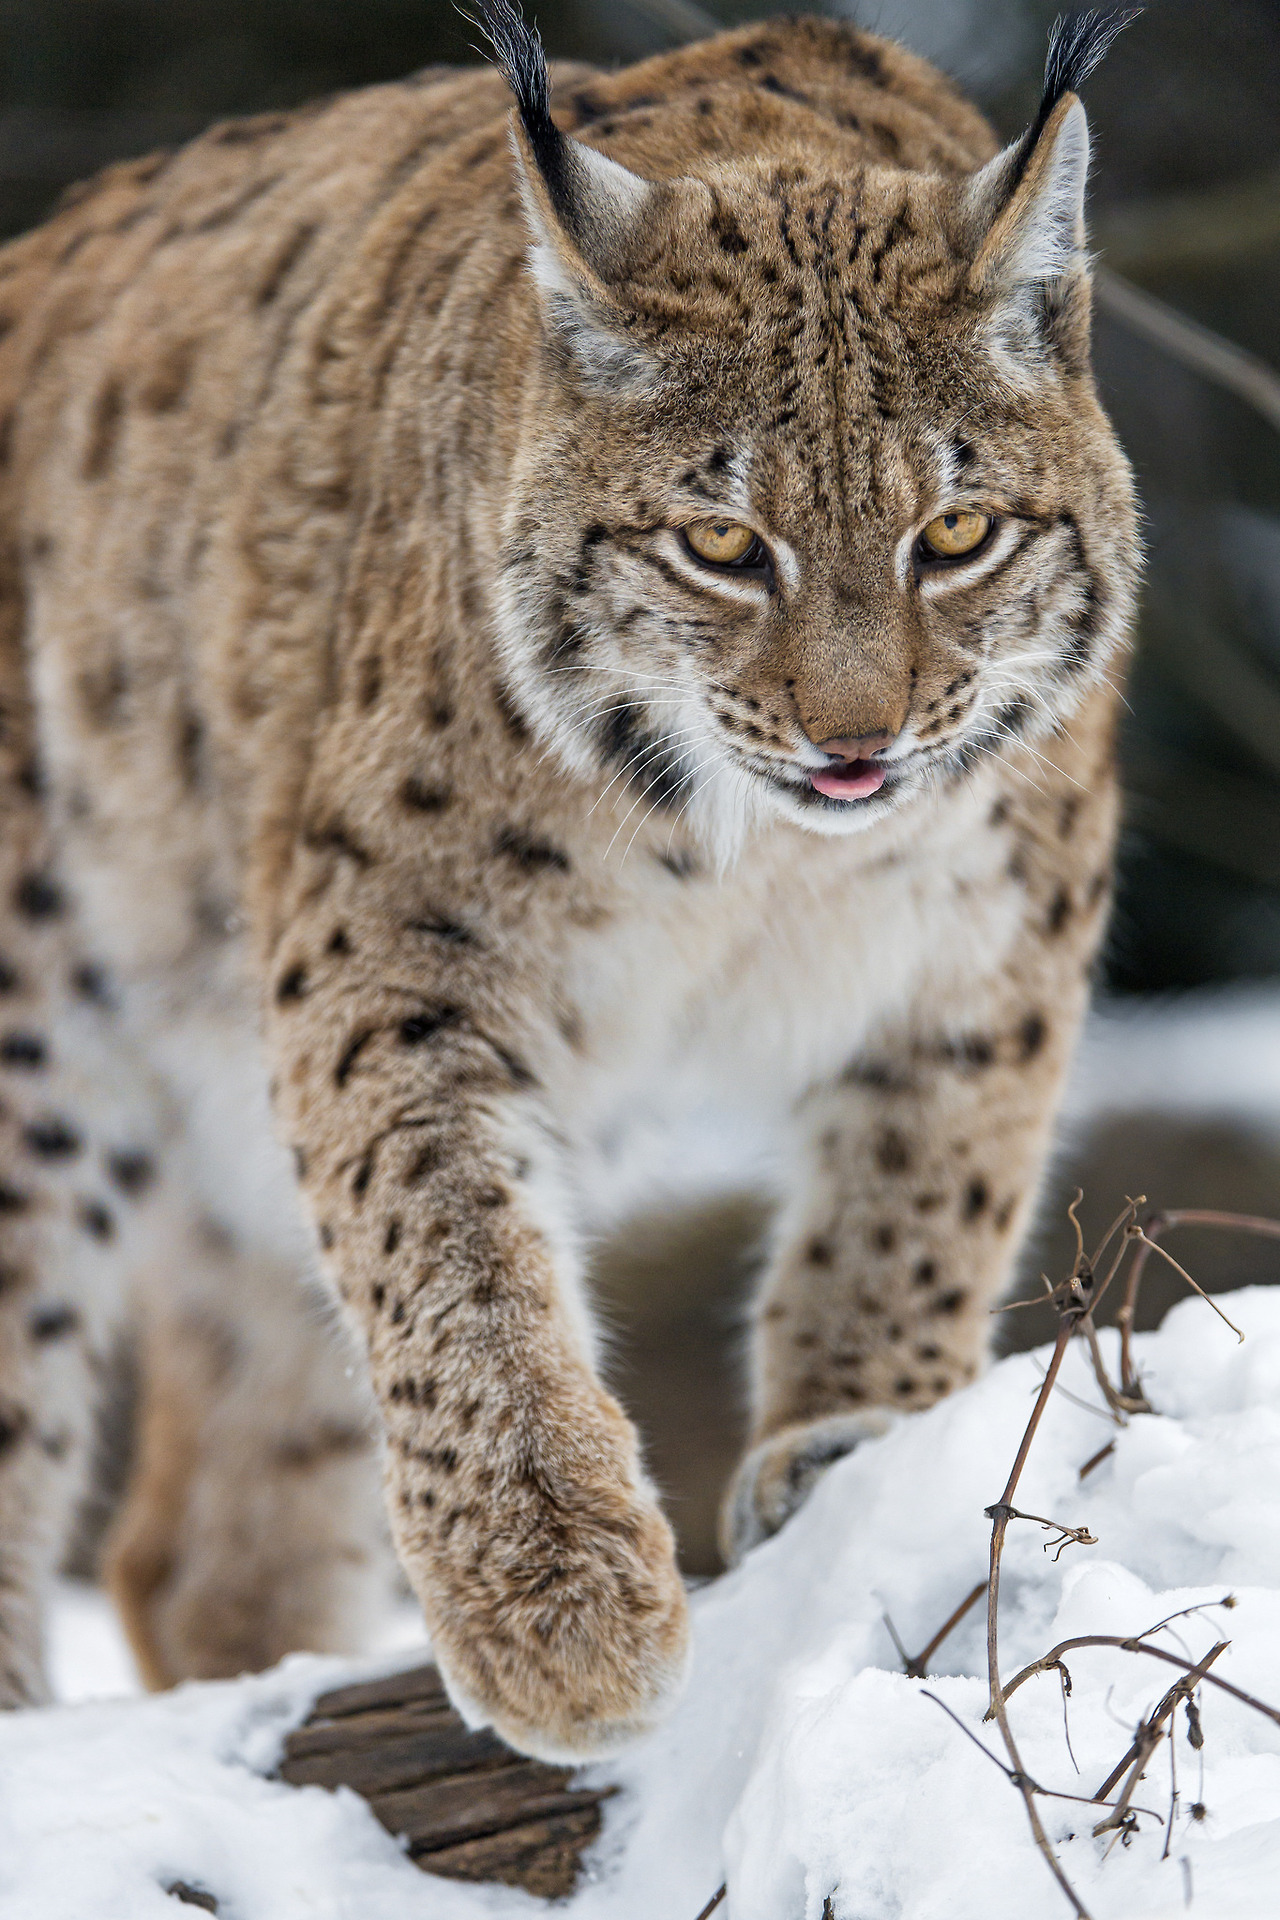 Lynx in the snow again by Tambako The Jaguar on Flickr